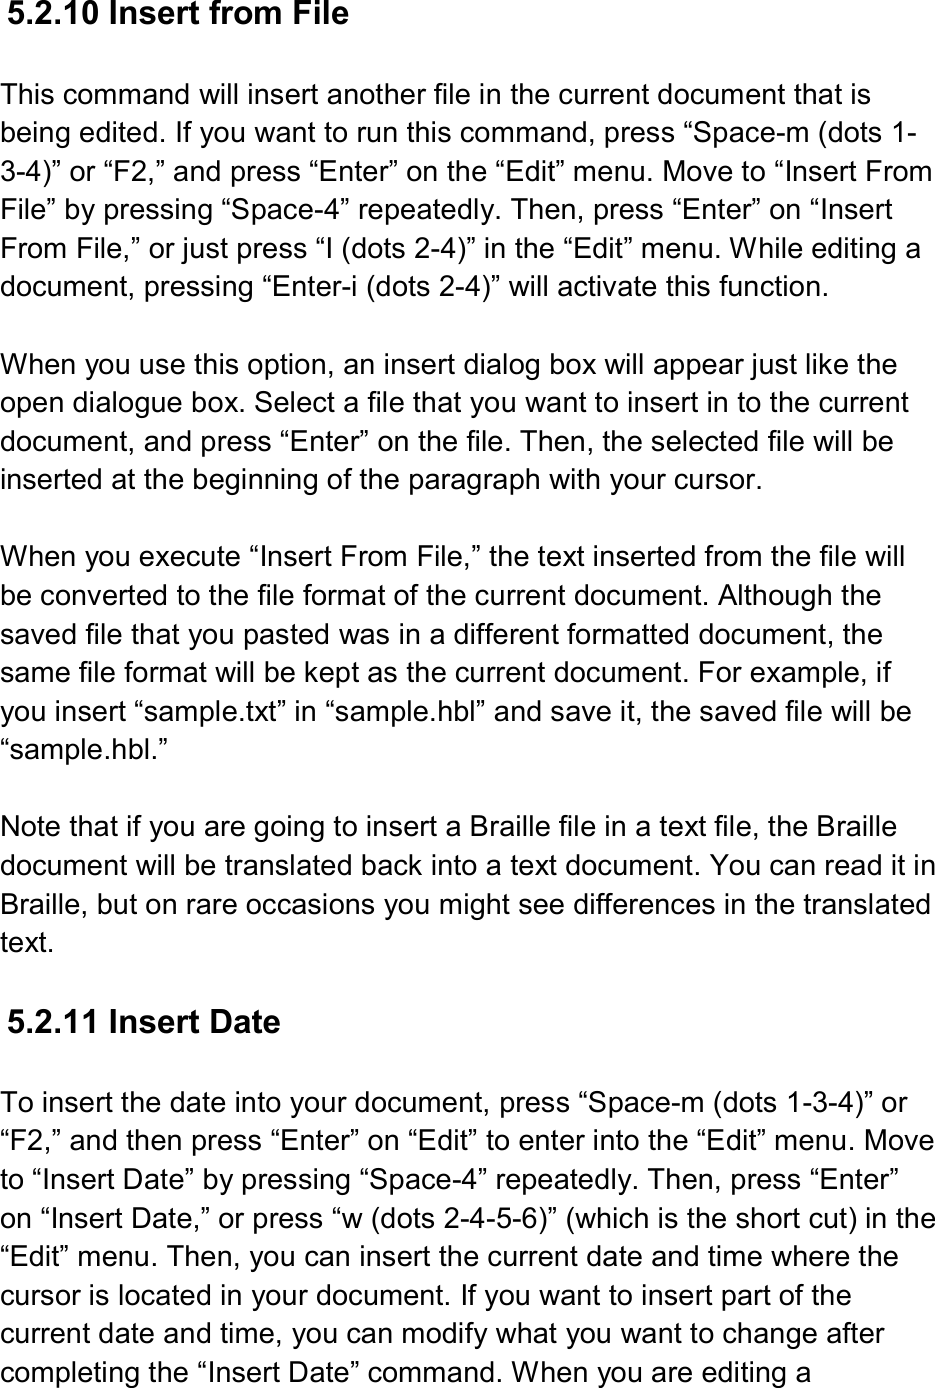  5.2.10 Insert from File  This command will insert another file in the current document that is being edited. If you want to run this command, press “Space-m (dots 1-3-4)” or “F2,” and press “Enter” on the “Edit” menu. Move to “Insert From File” by pressing “Space-4” repeatedly. Then, press “Enter” on “Insert From File,” or just press “I (dots 2-4)” in the “Edit” menu. While editing a document, pressing “Enter-i (dots 2-4)” will activate this function.  When you use this option, an insert dialog box will appear just like the open dialogue box. Select a file that you want to insert in to the current document, and press “Enter” on the file. Then, the selected file will be inserted at the beginning of the paragraph with your cursor.  When you execute “Insert From File,” the text inserted from the file will be converted to the file format of the current document. Although the saved file that you pasted was in a different formatted document, the same file format will be kept as the current document. For example, if you insert “sample.txt” in “sample.hbl” and save it, the saved file will be “sample.hbl.”    Note that if you are going to insert a Braille file in a text file, the Braille document will be translated back into a text document. You can read it in Braille, but on rare occasions you might see differences in the translated text.  5.2.11 Insert Date  To insert the date into your document, press “Space-m (dots 1-3-4)” or “F2,” and then press “Enter” on “Edit” to enter into the “Edit” menu. Move to “Insert Date” by pressing “Space-4” repeatedly. Then, press “Enter” on “Insert Date,” or press “w (dots 2-4-5-6)” (which is the short cut) in the “Edit” menu. Then, you can insert the current date and time where the cursor is located in your document. If you want to insert part of the current date and time, you can modify what you want to change after completing the “Insert Date” command. When you are editing a 